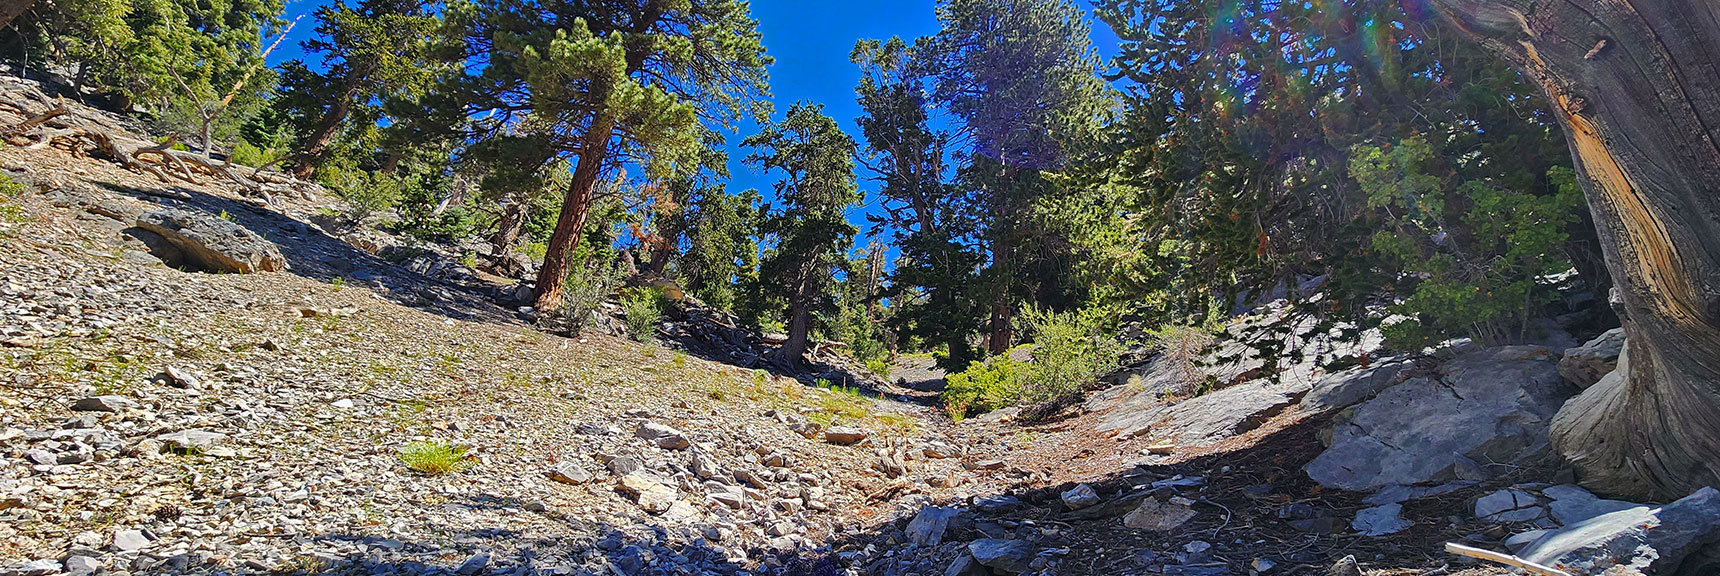 Not Far Above 9,000ft Gully Becomes Shallow, Soon to Disappear. | Fletcher Canyon / Fletcher Peak / Cockscomb Ridge Circuit | Mt. Charleston Wilderness | Spring Mountains, Nevada